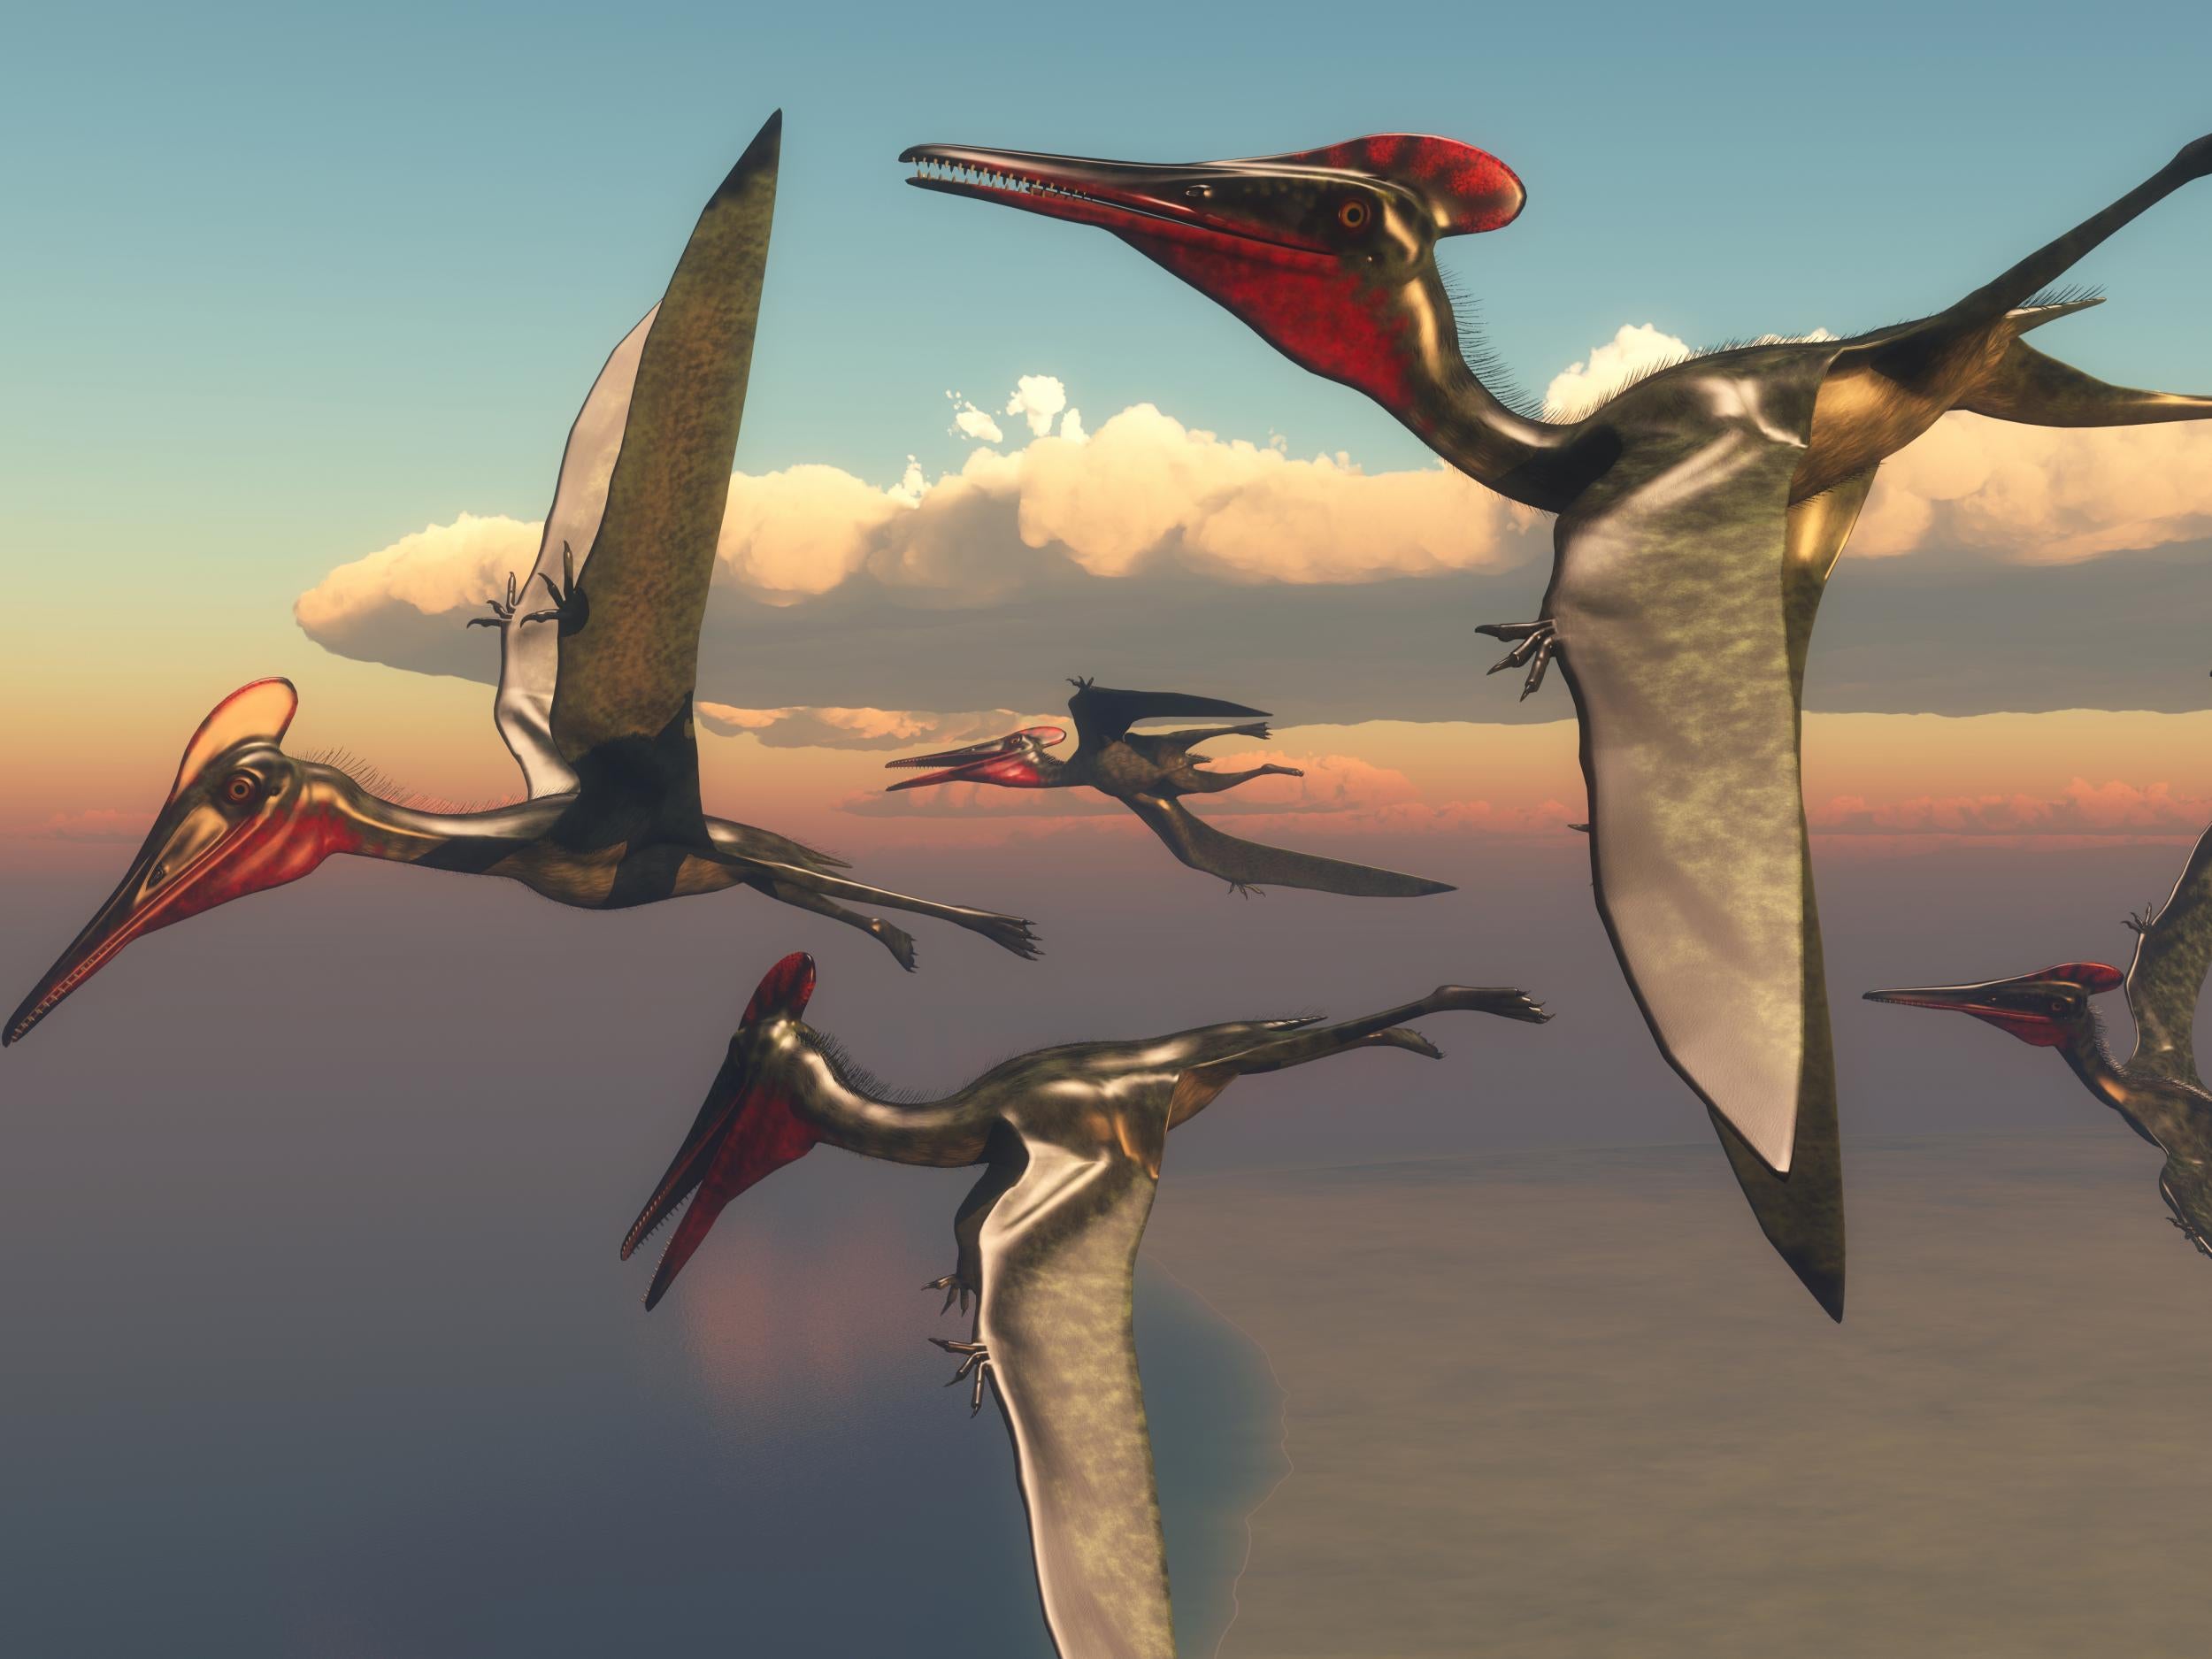 Pterosaur eggs help reveal the early life of flying reptiles